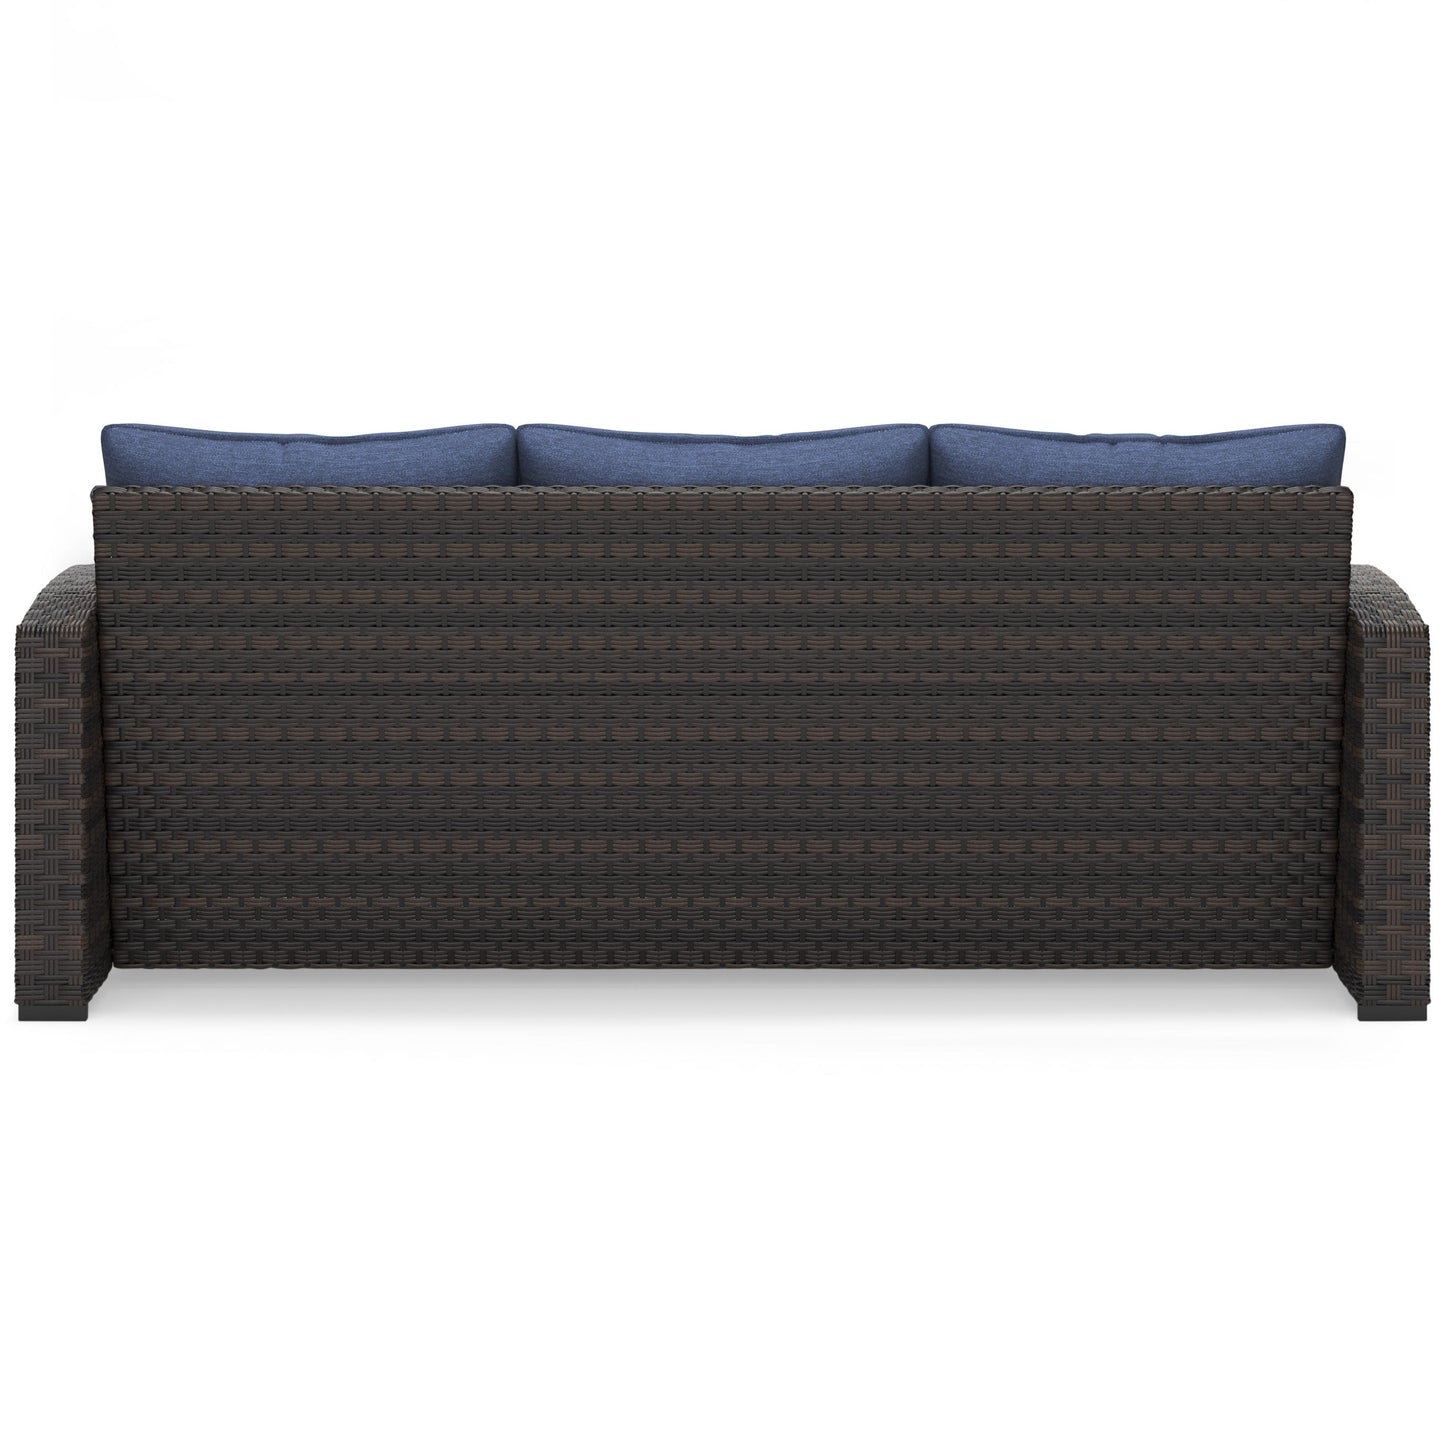 Signature Design by Ashley Outdoor Seating Sofas P340-838 IMAGE 4